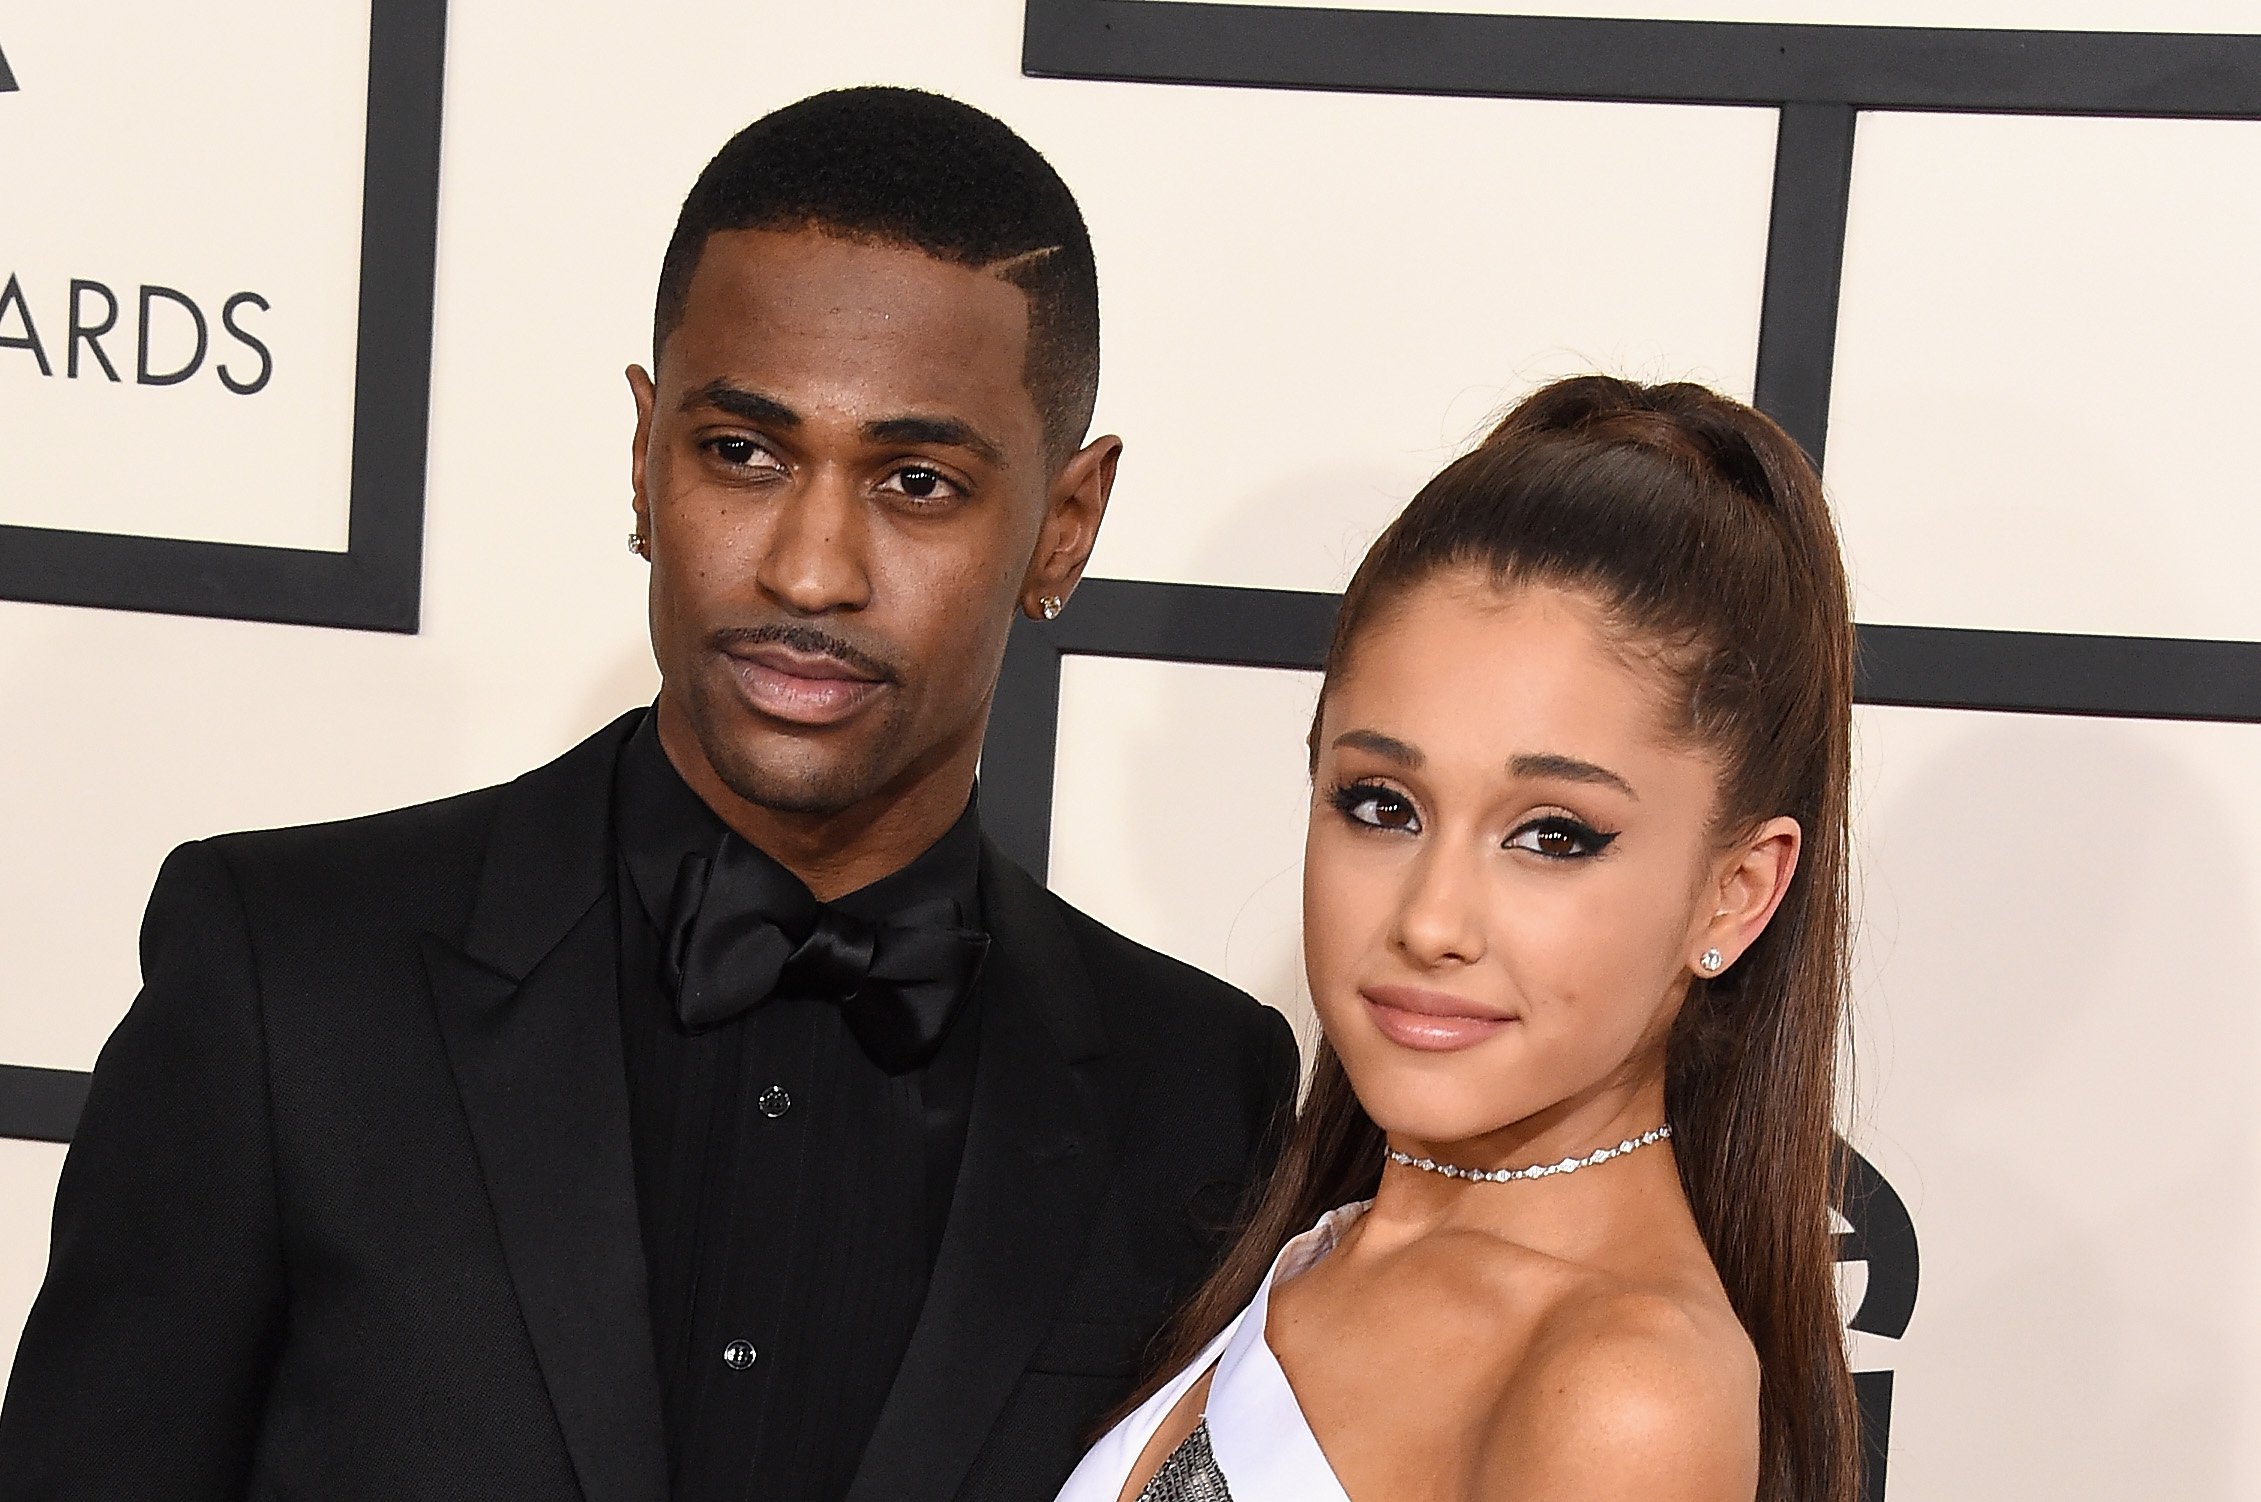 Big Sean (L) and Ariana Grande attend The 57th Annual GRAMMY Awards on February 8, 2015, in Los Angeles, California.